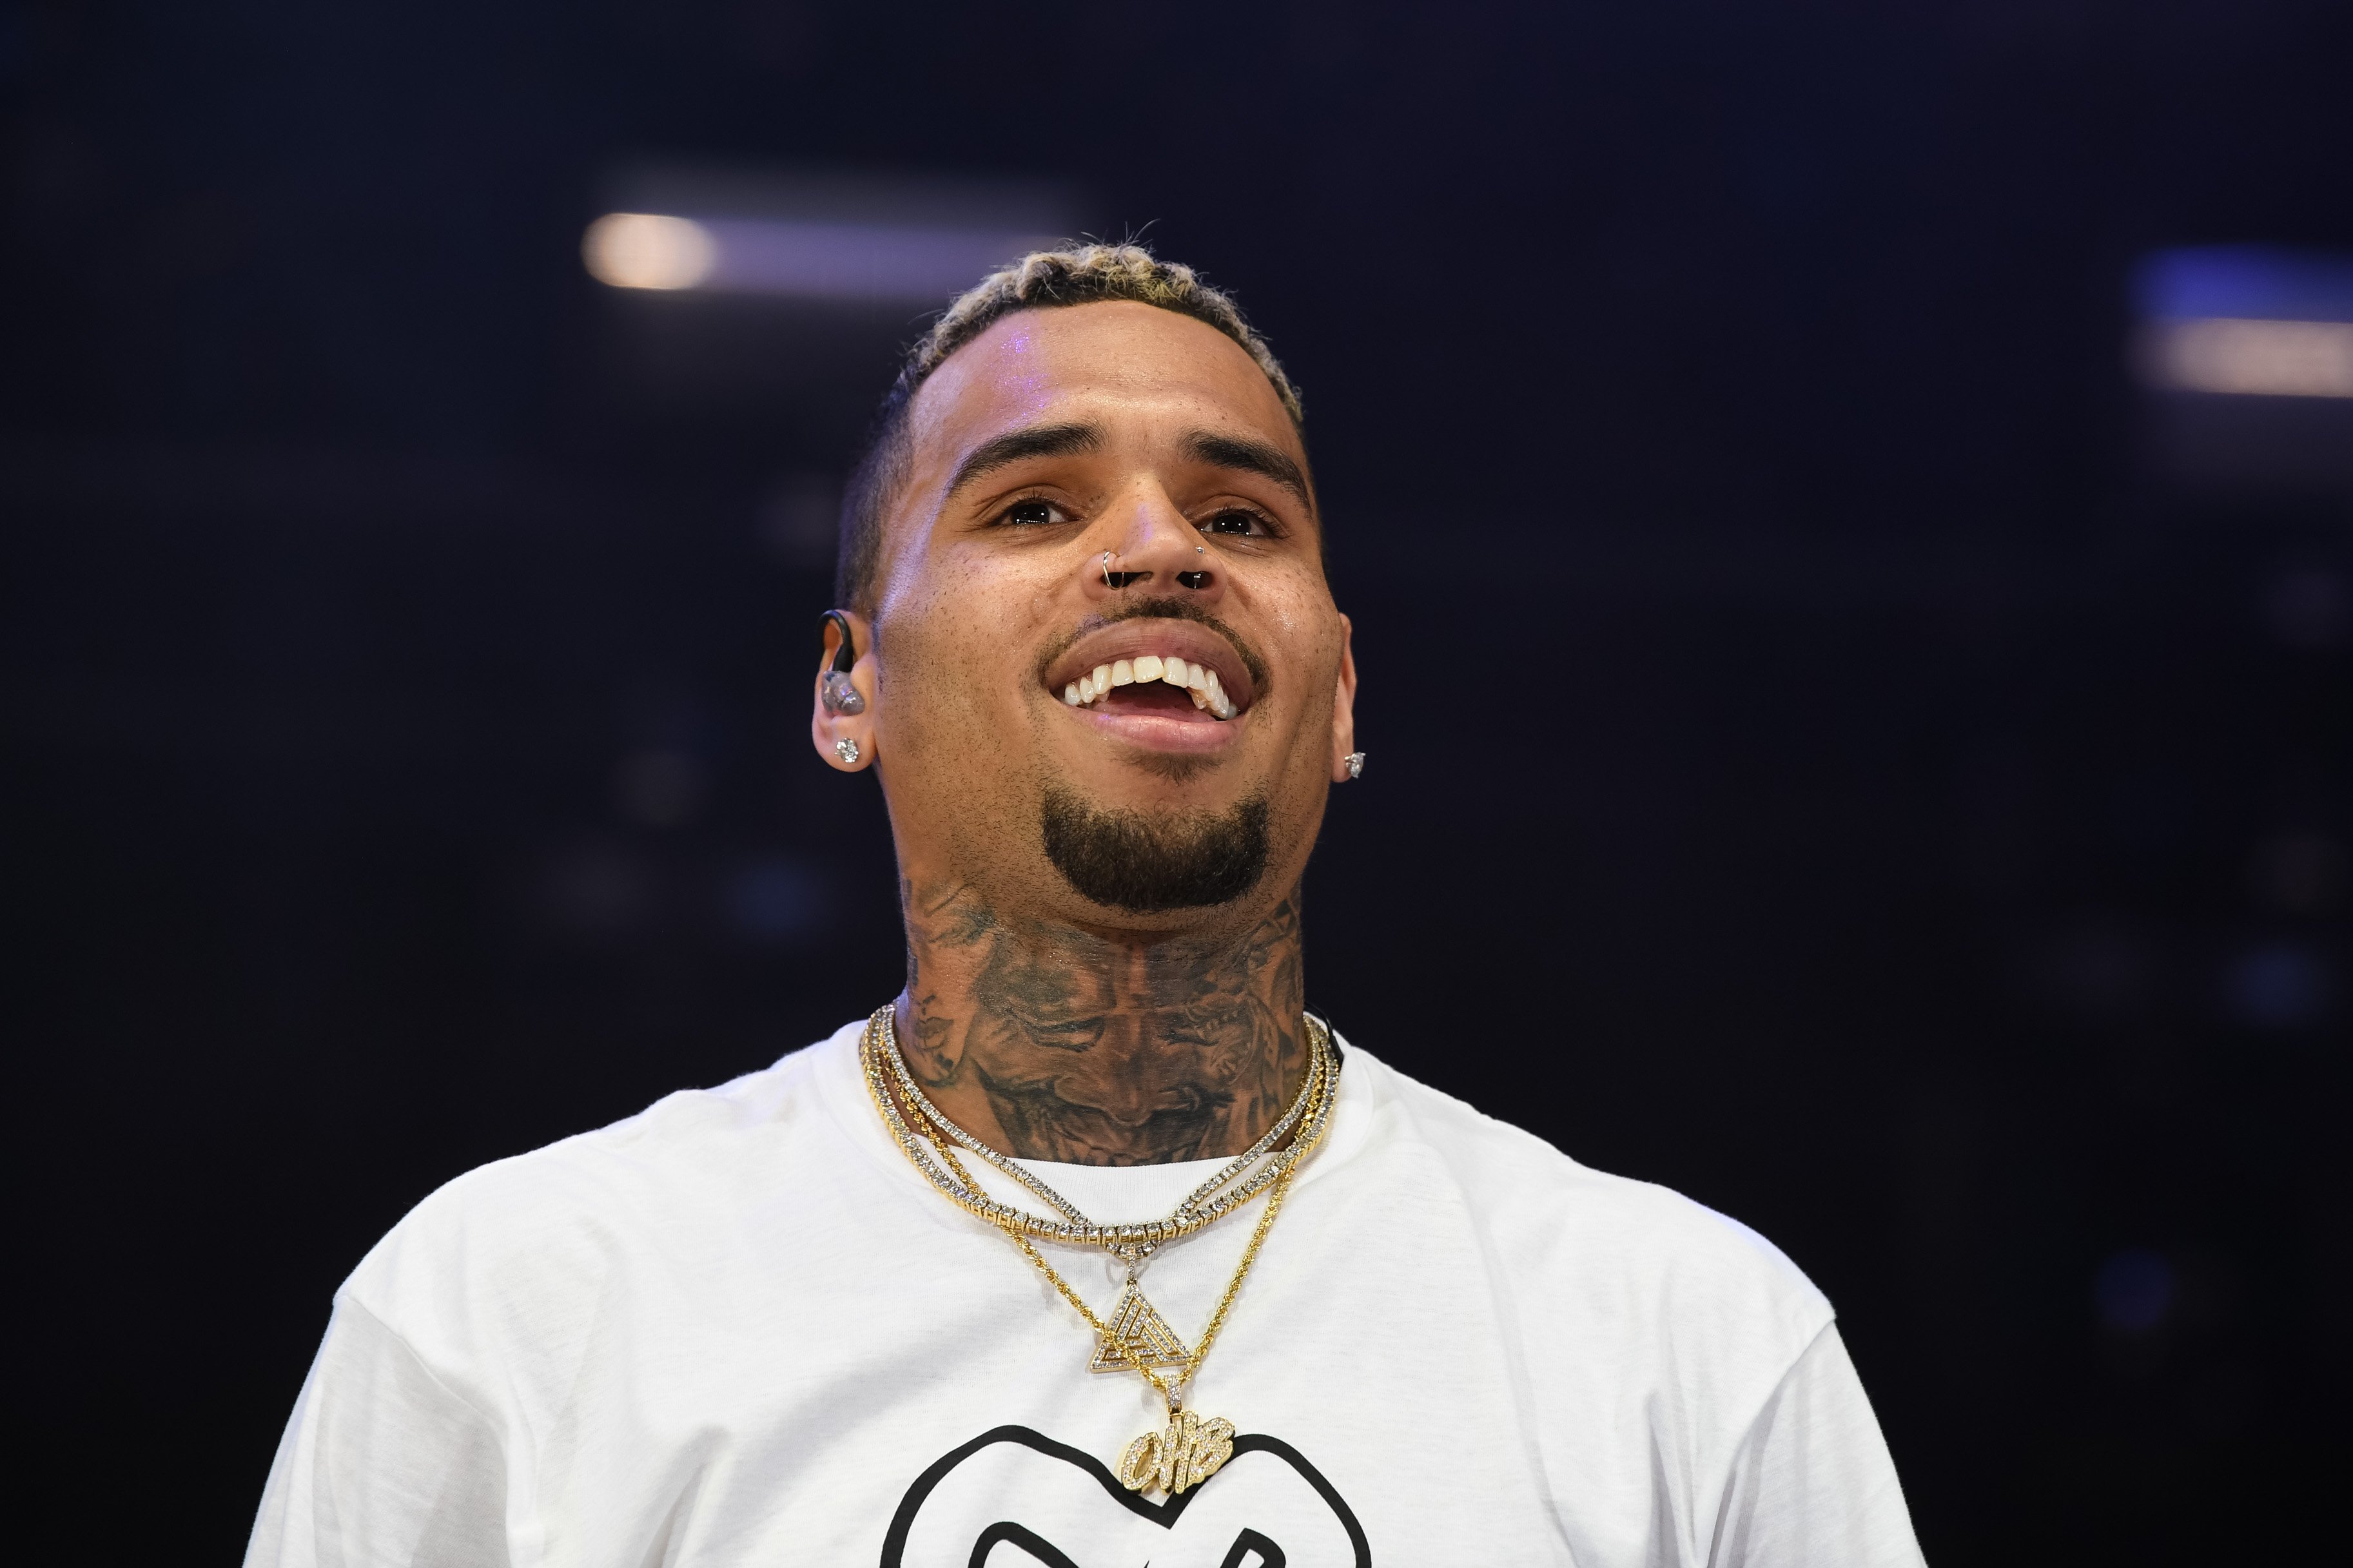 Chris Brown sings at HOT 97 Summer Jam 2017 on June 11, 2017  | Photo: Getty Images